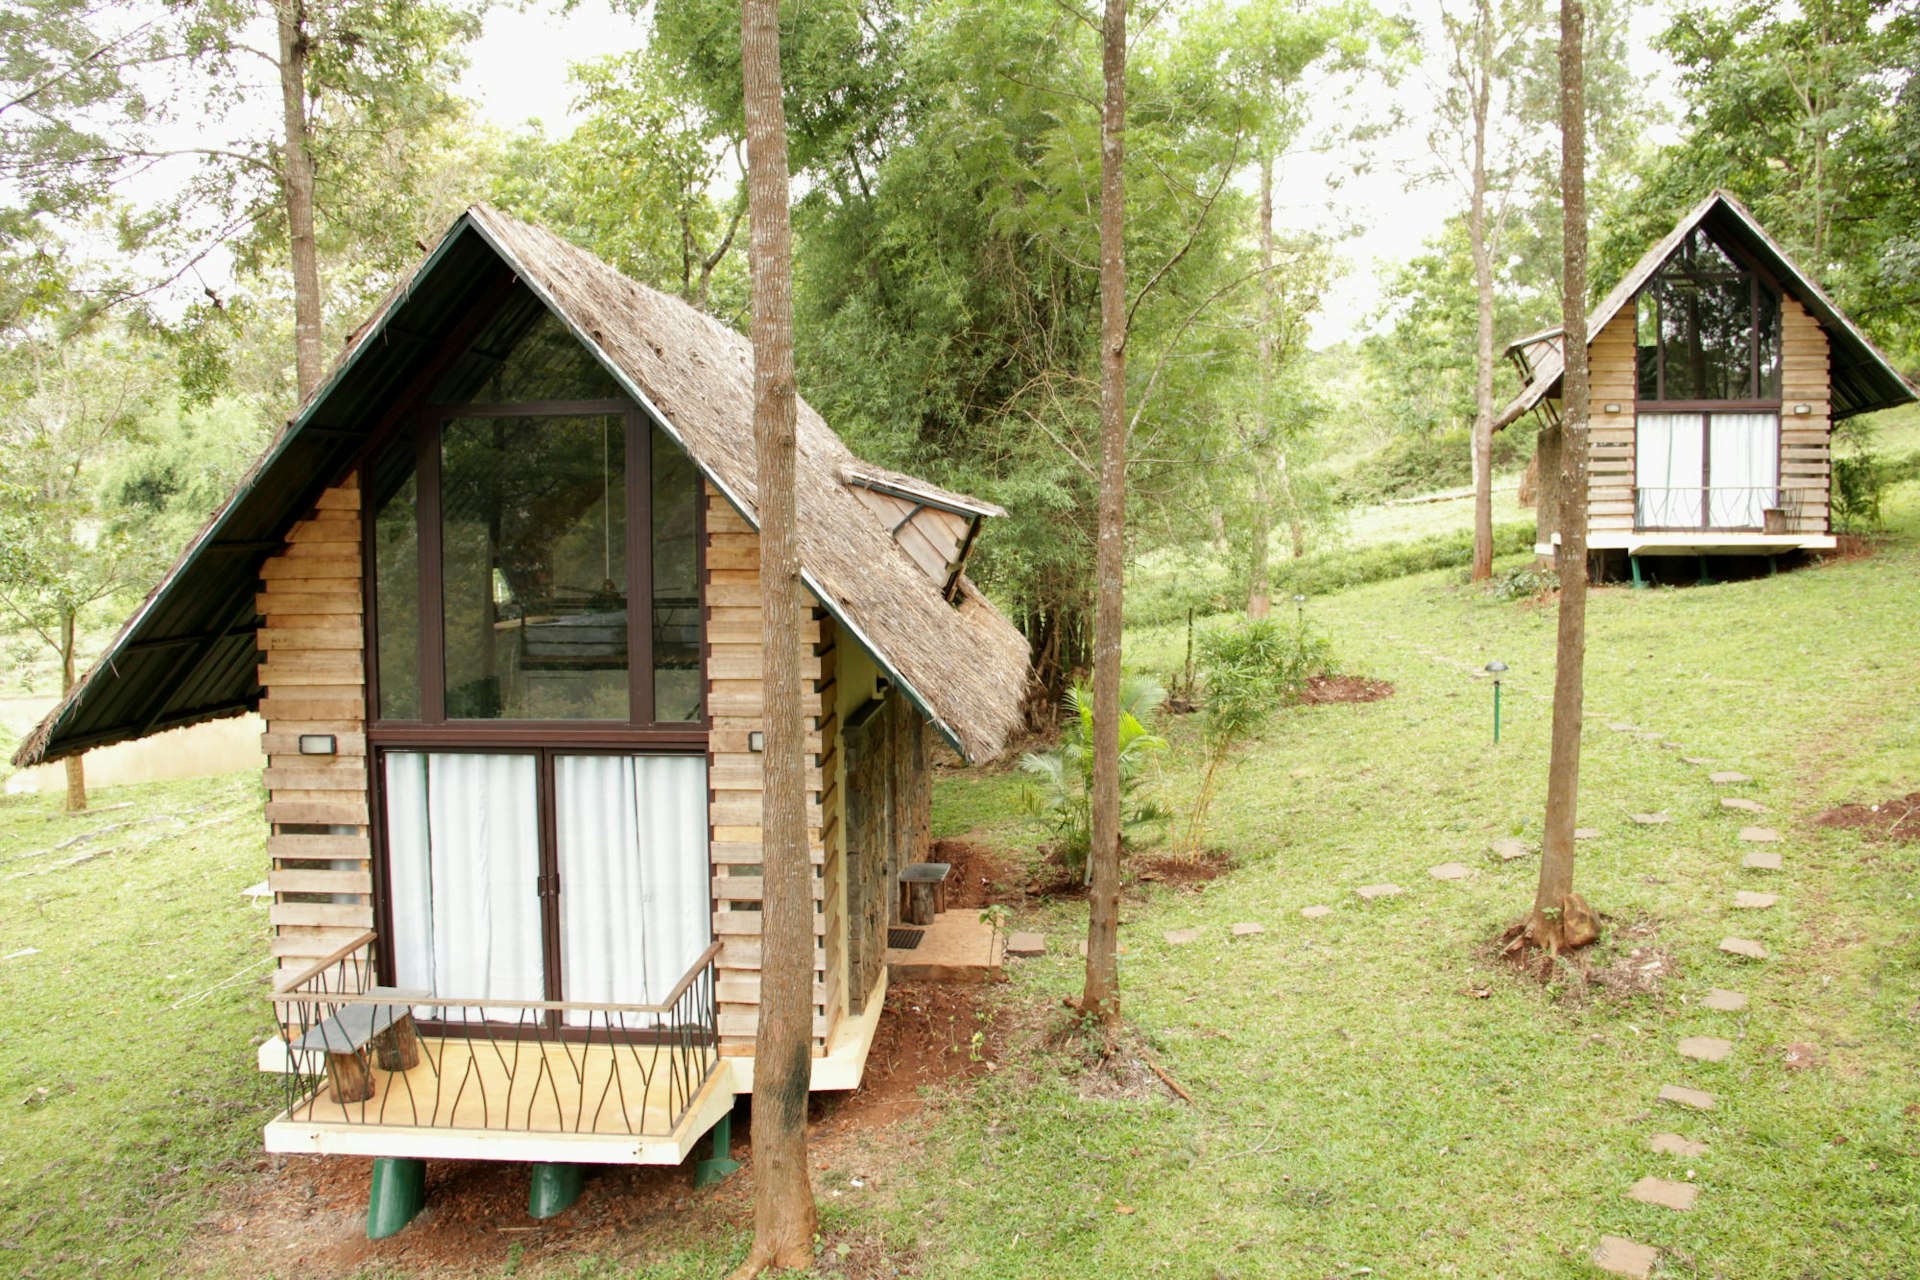 Stylish cottages edge onto the forest at Gorukana © Supriya Sehgal / Lonely Planet